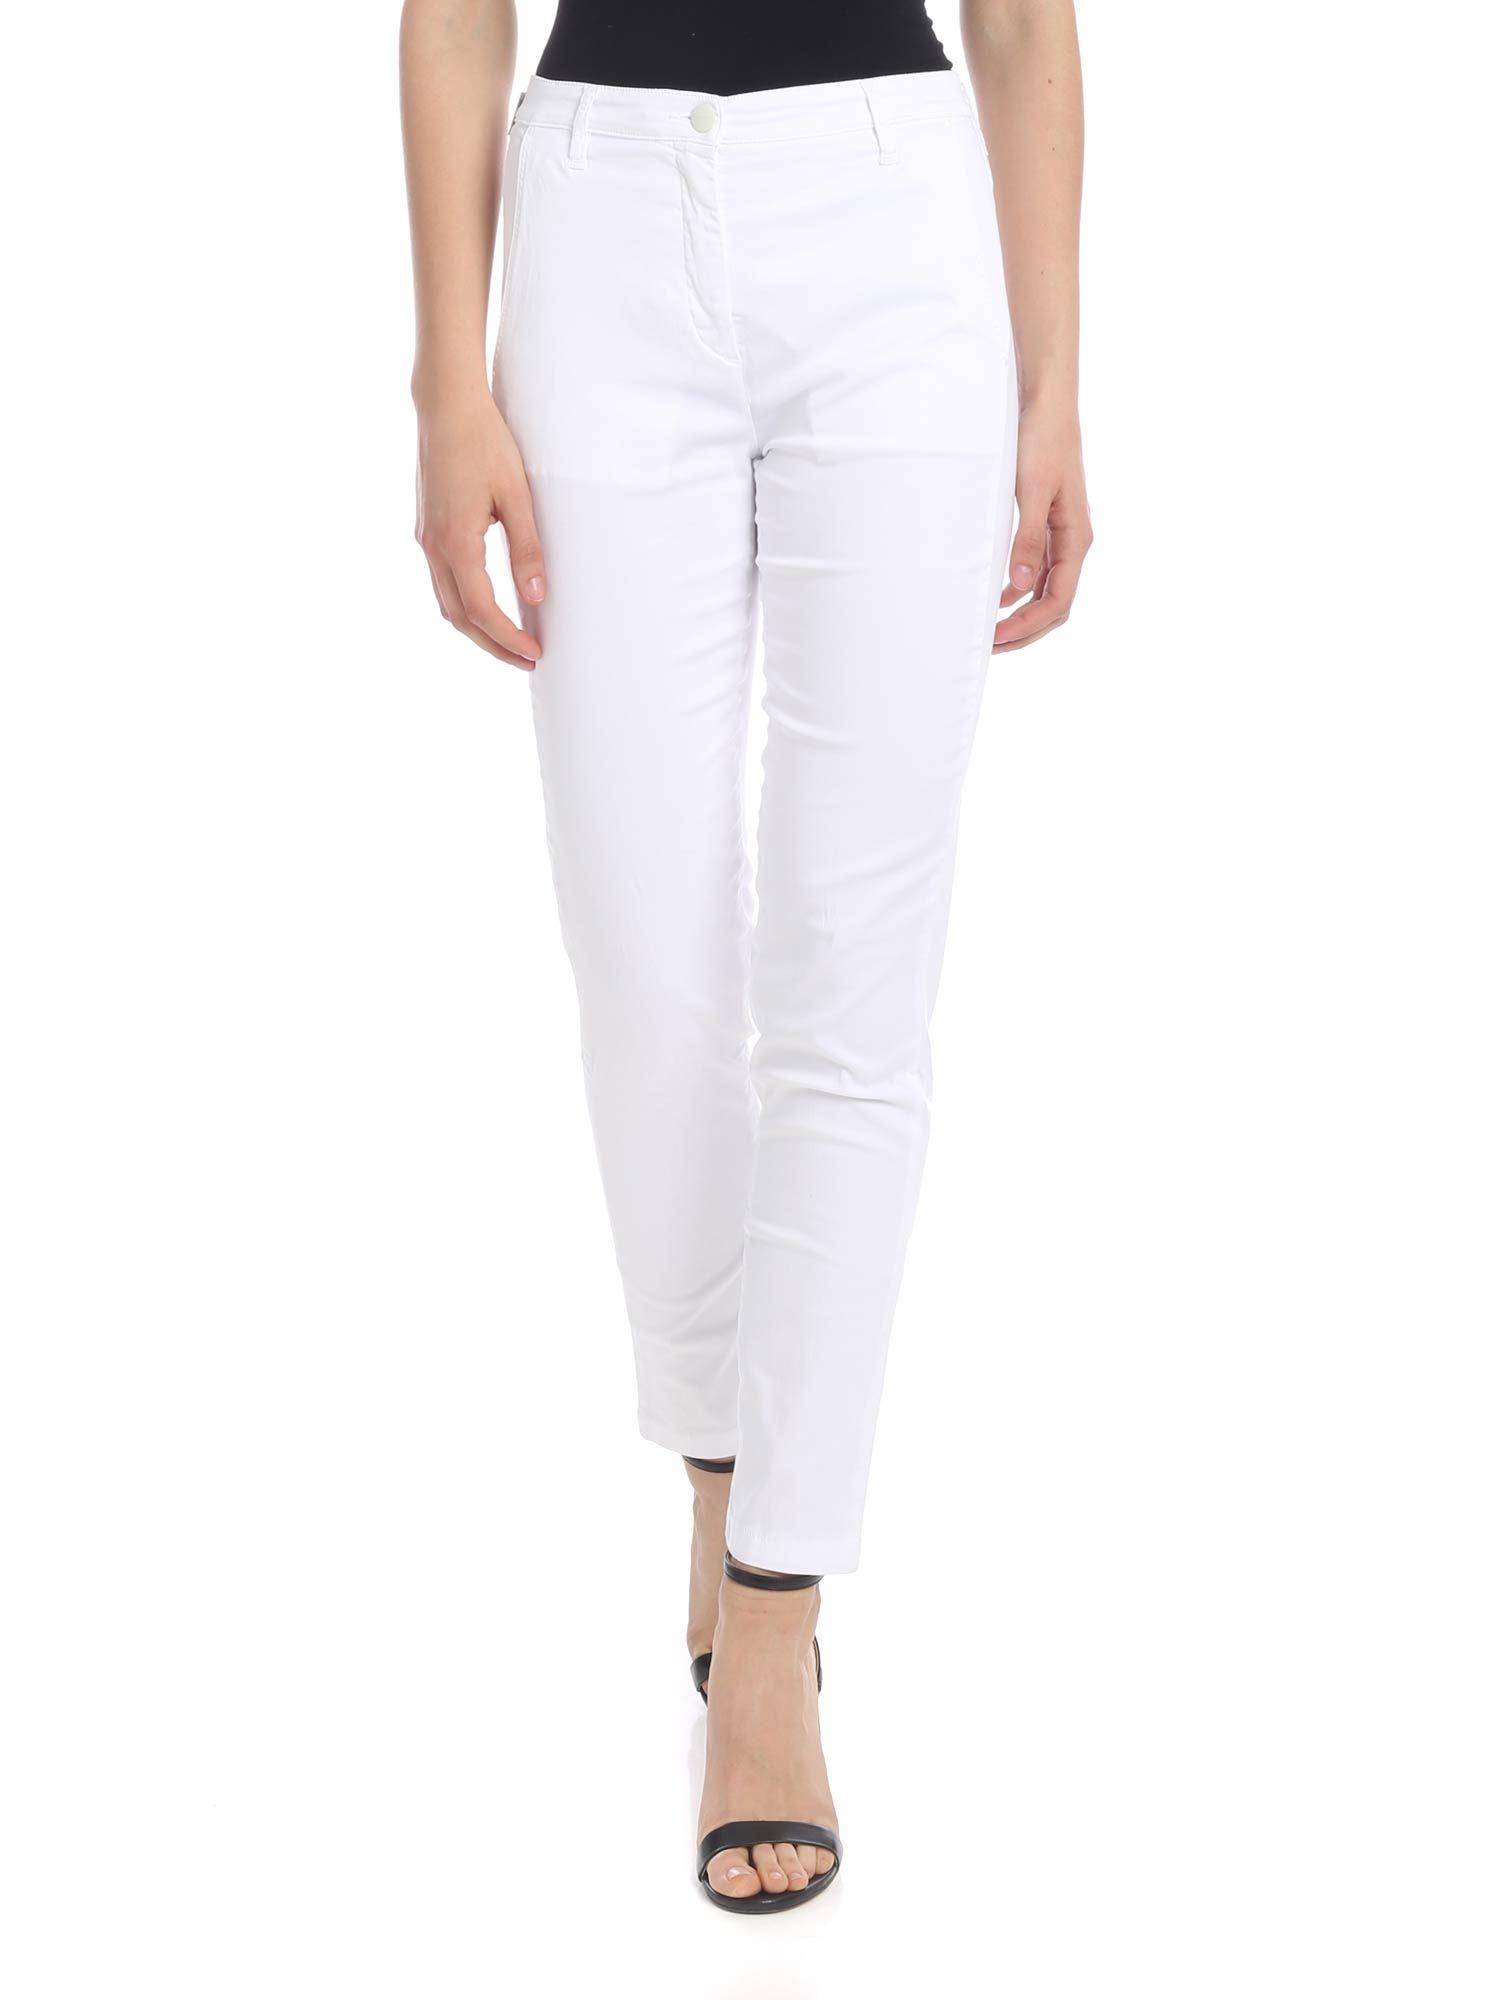 Jacob Cohen Cotton Marina Trousers In White - Lyst